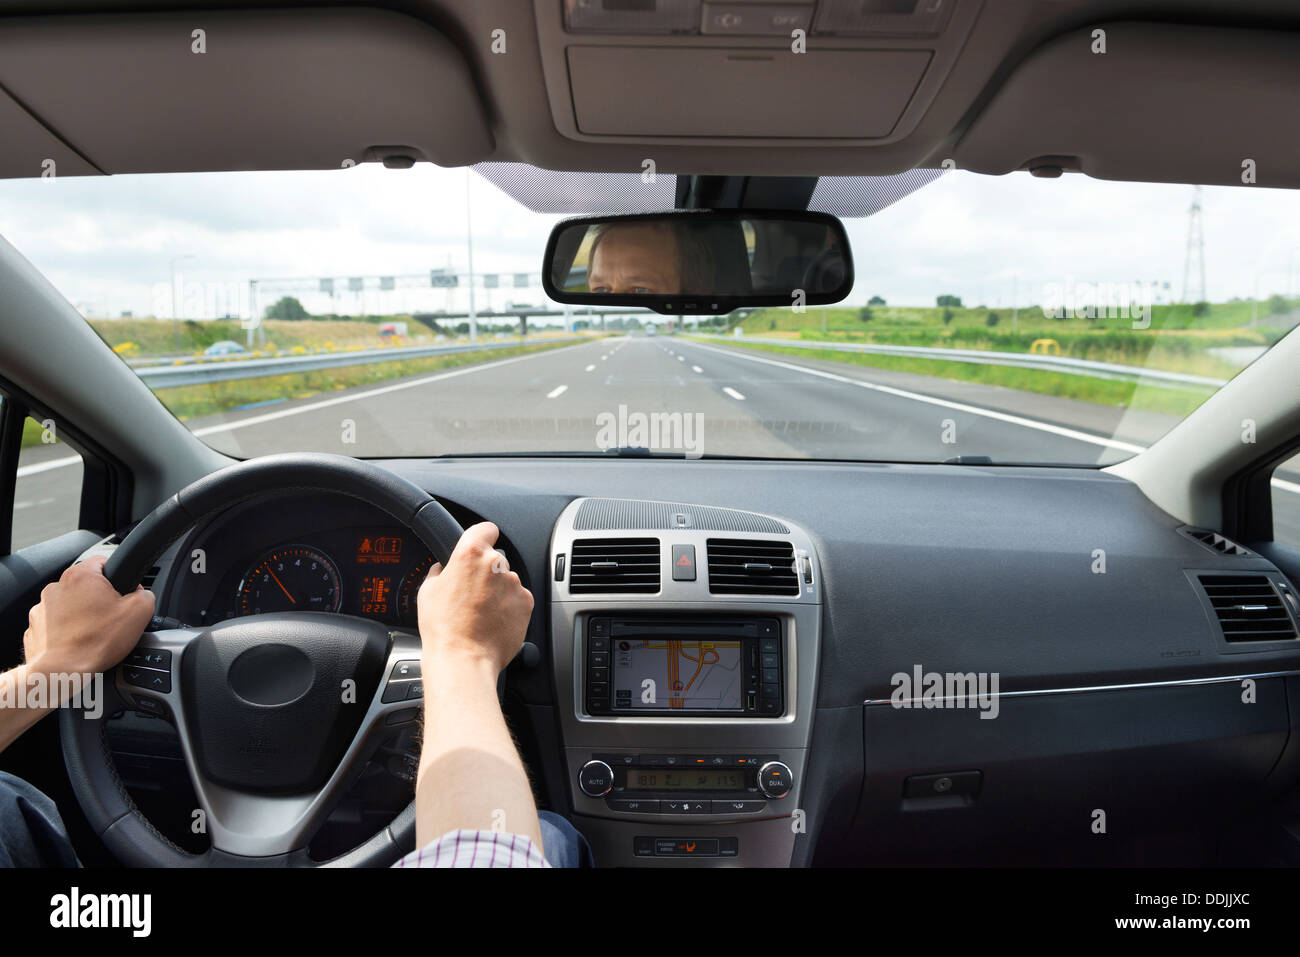 Mobility concept of a driver inside a modern, luxurious car on a motorway in the center lane Stock Photo